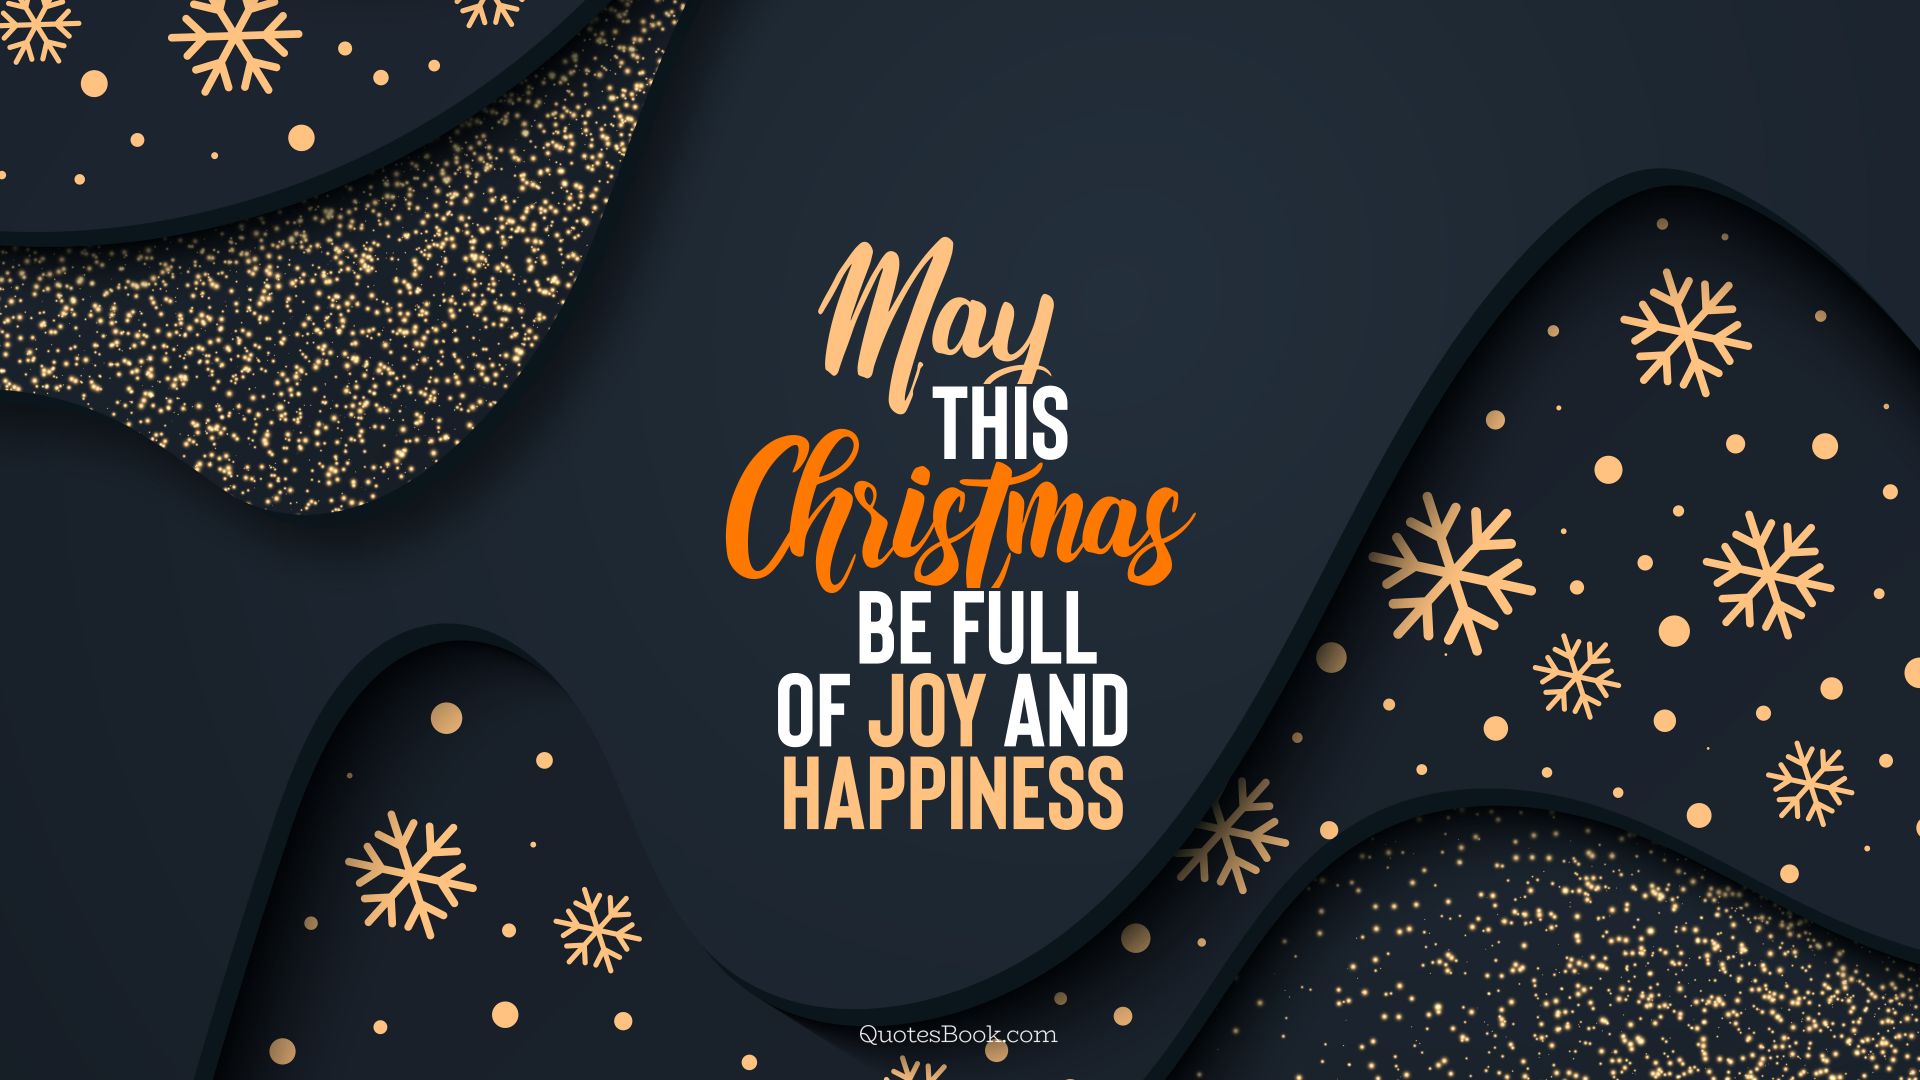 May this Christmas be full of joy and happiness. - Quote by QuotesBook